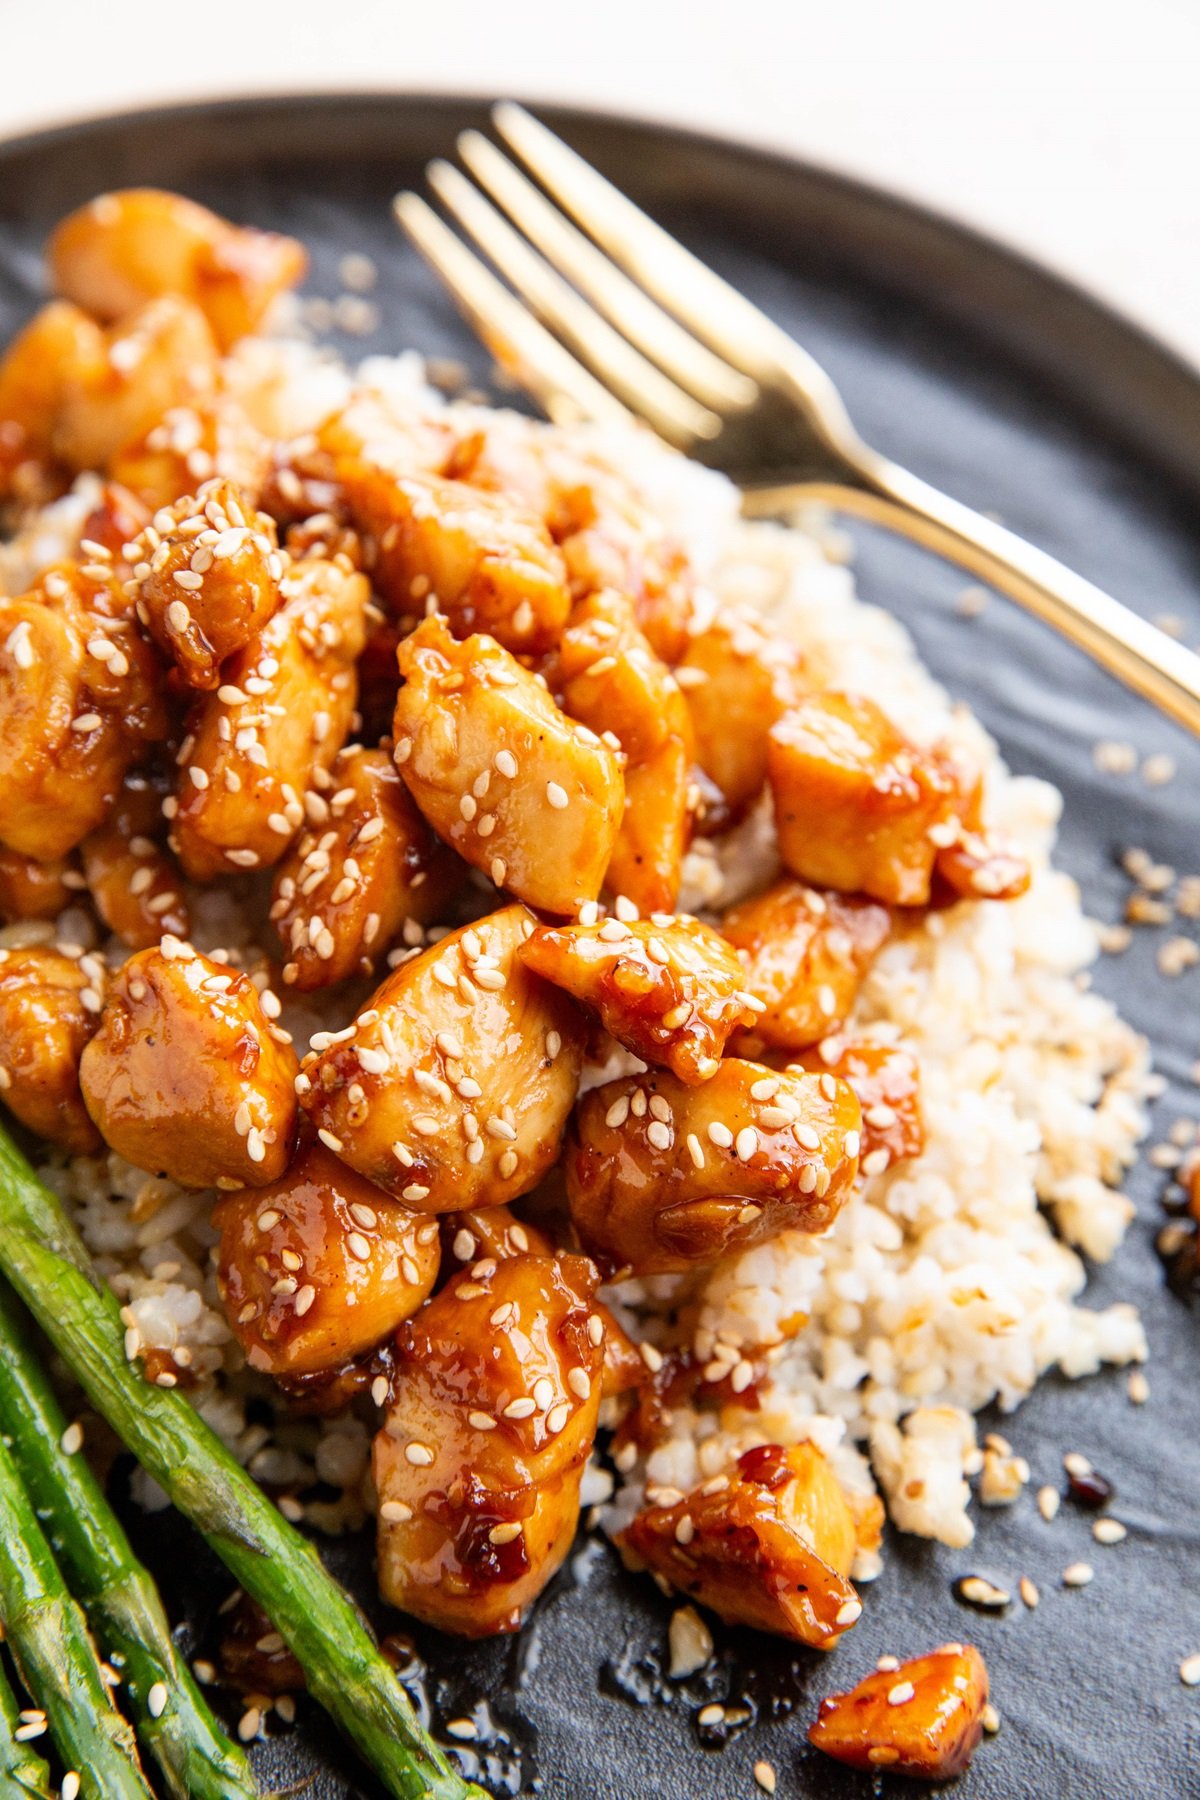 Plate of brown rice, sesame chicken, and asparagus, ready to eat.